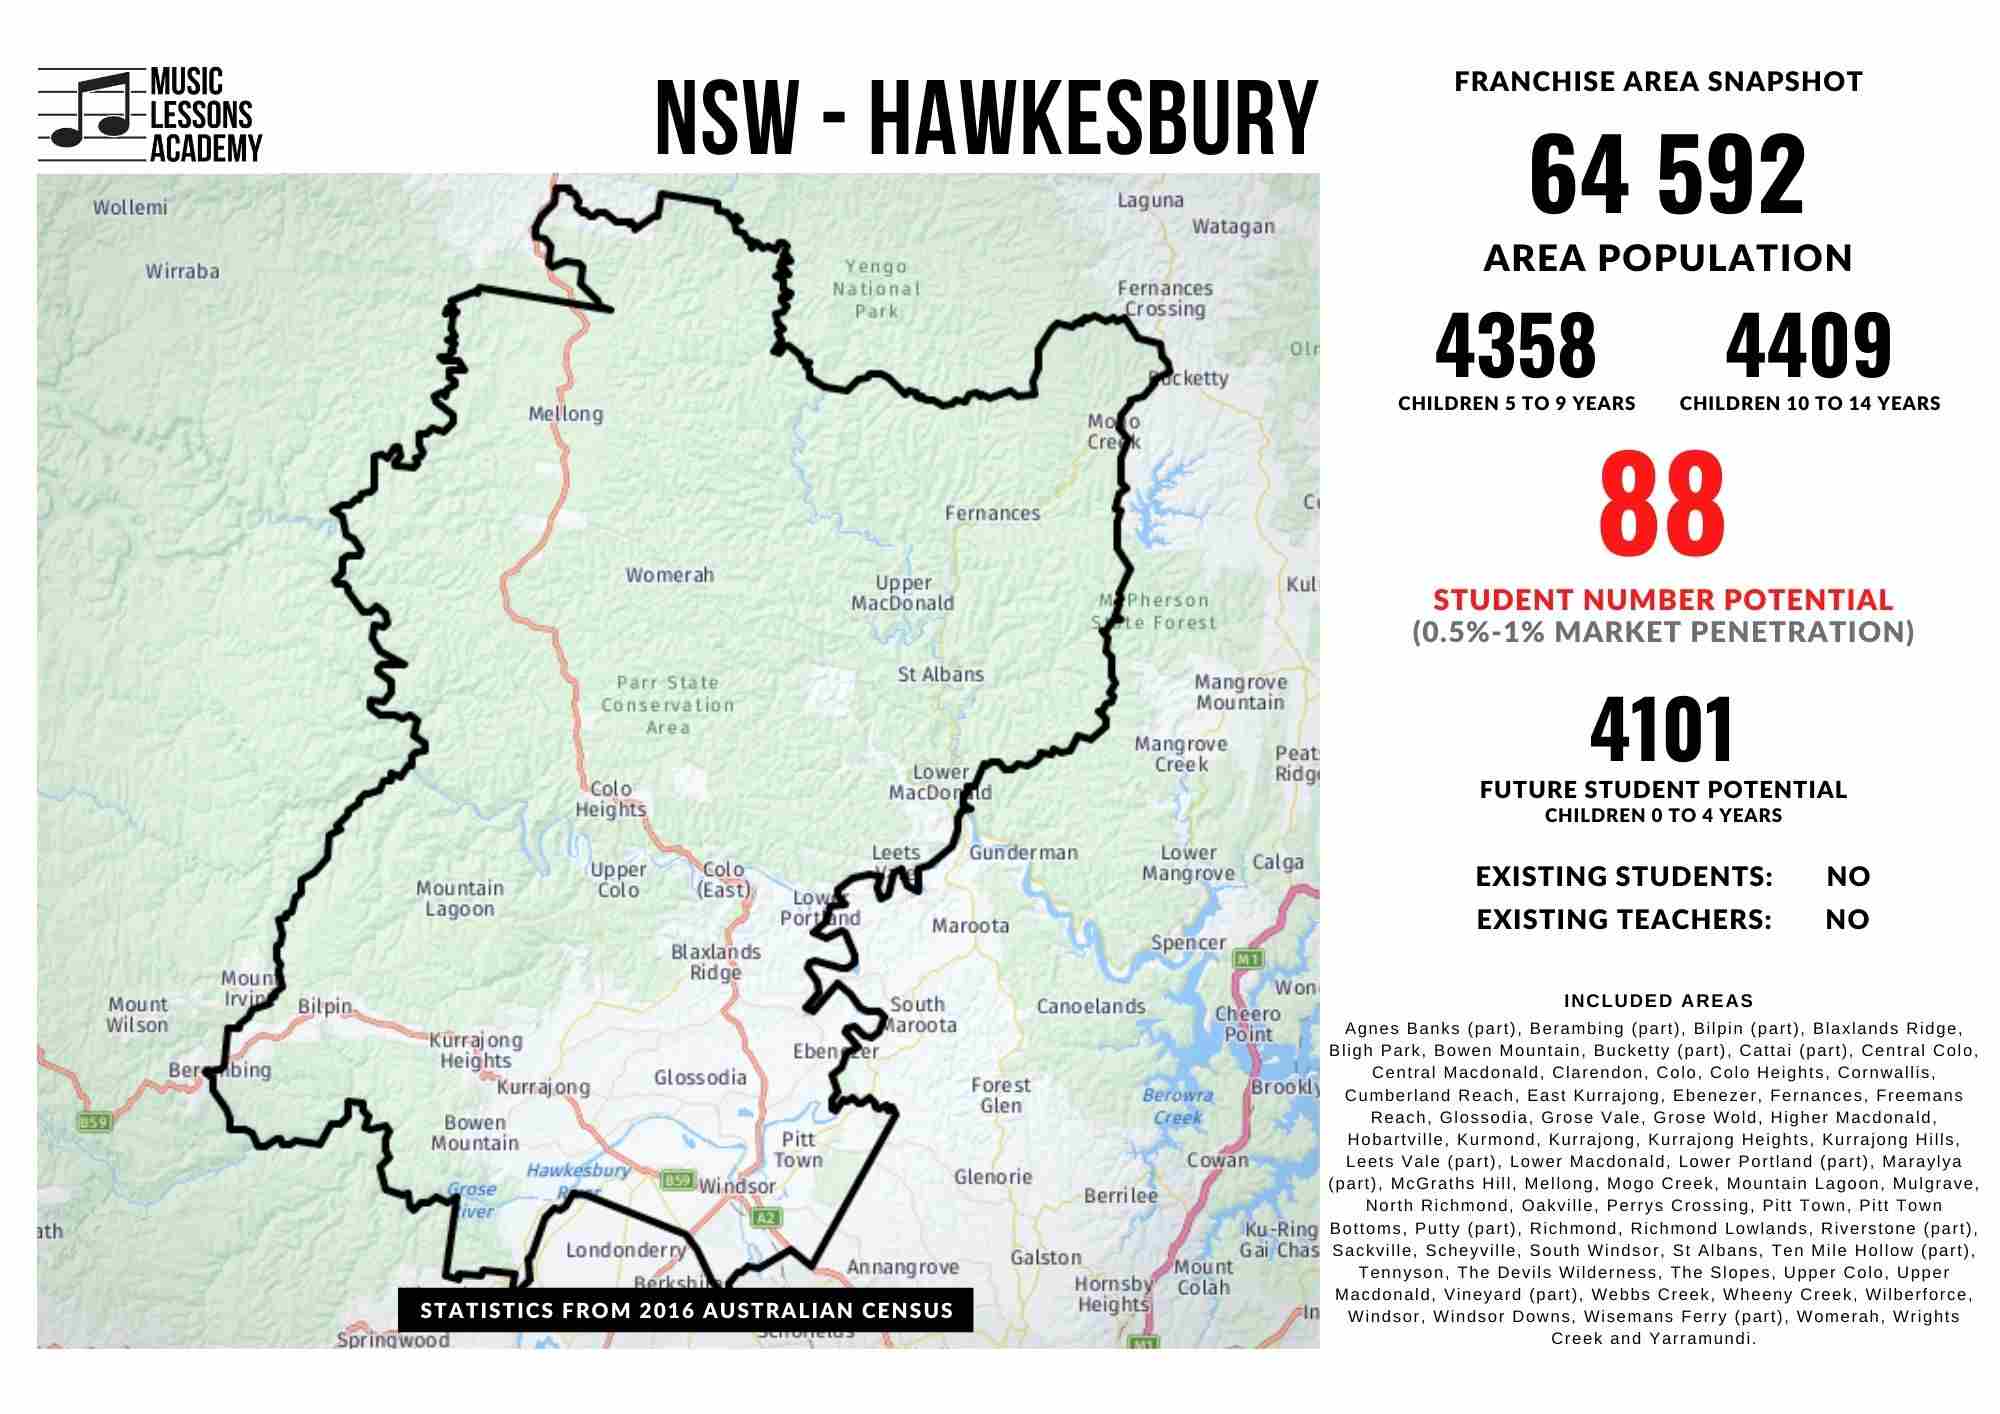 NSW hawkesbury Franchise for sale